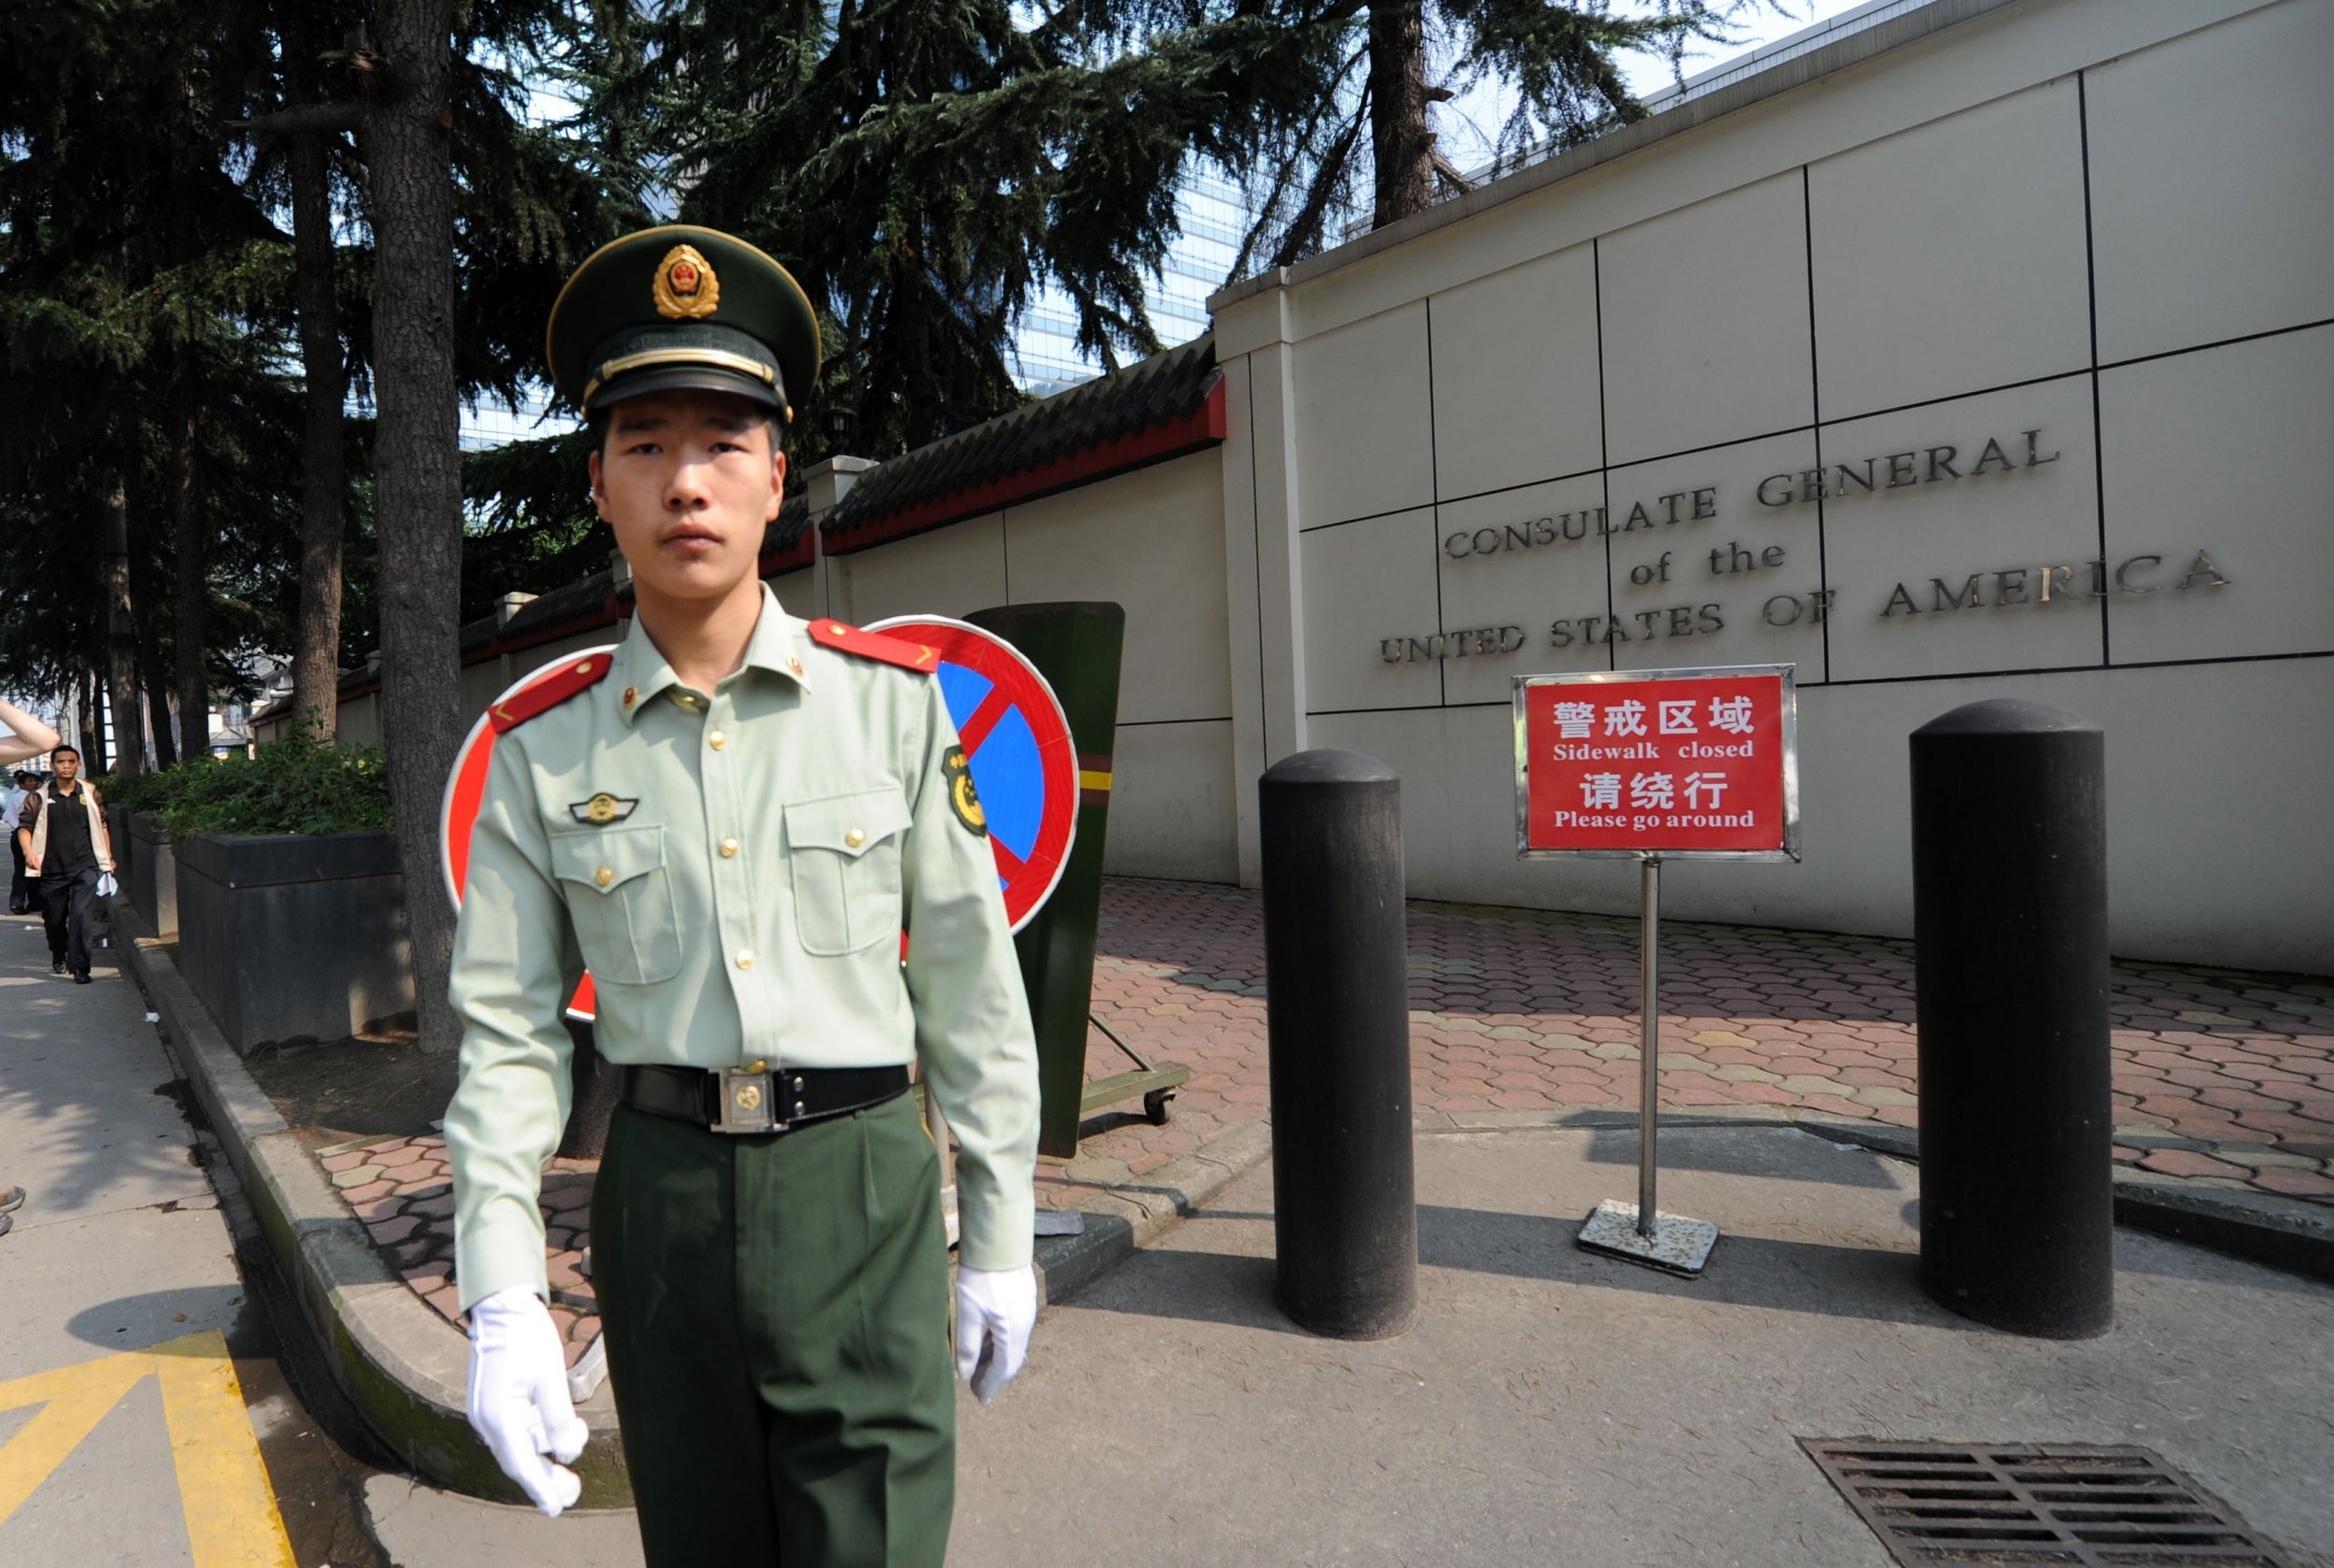 File: a Chinese paramilitary policeman stands guard at the entrance of the US consulate in Chengdu. China says it has revoked the licence for the consulate in retaliation for the closure of China's Houston consulate earlier this week